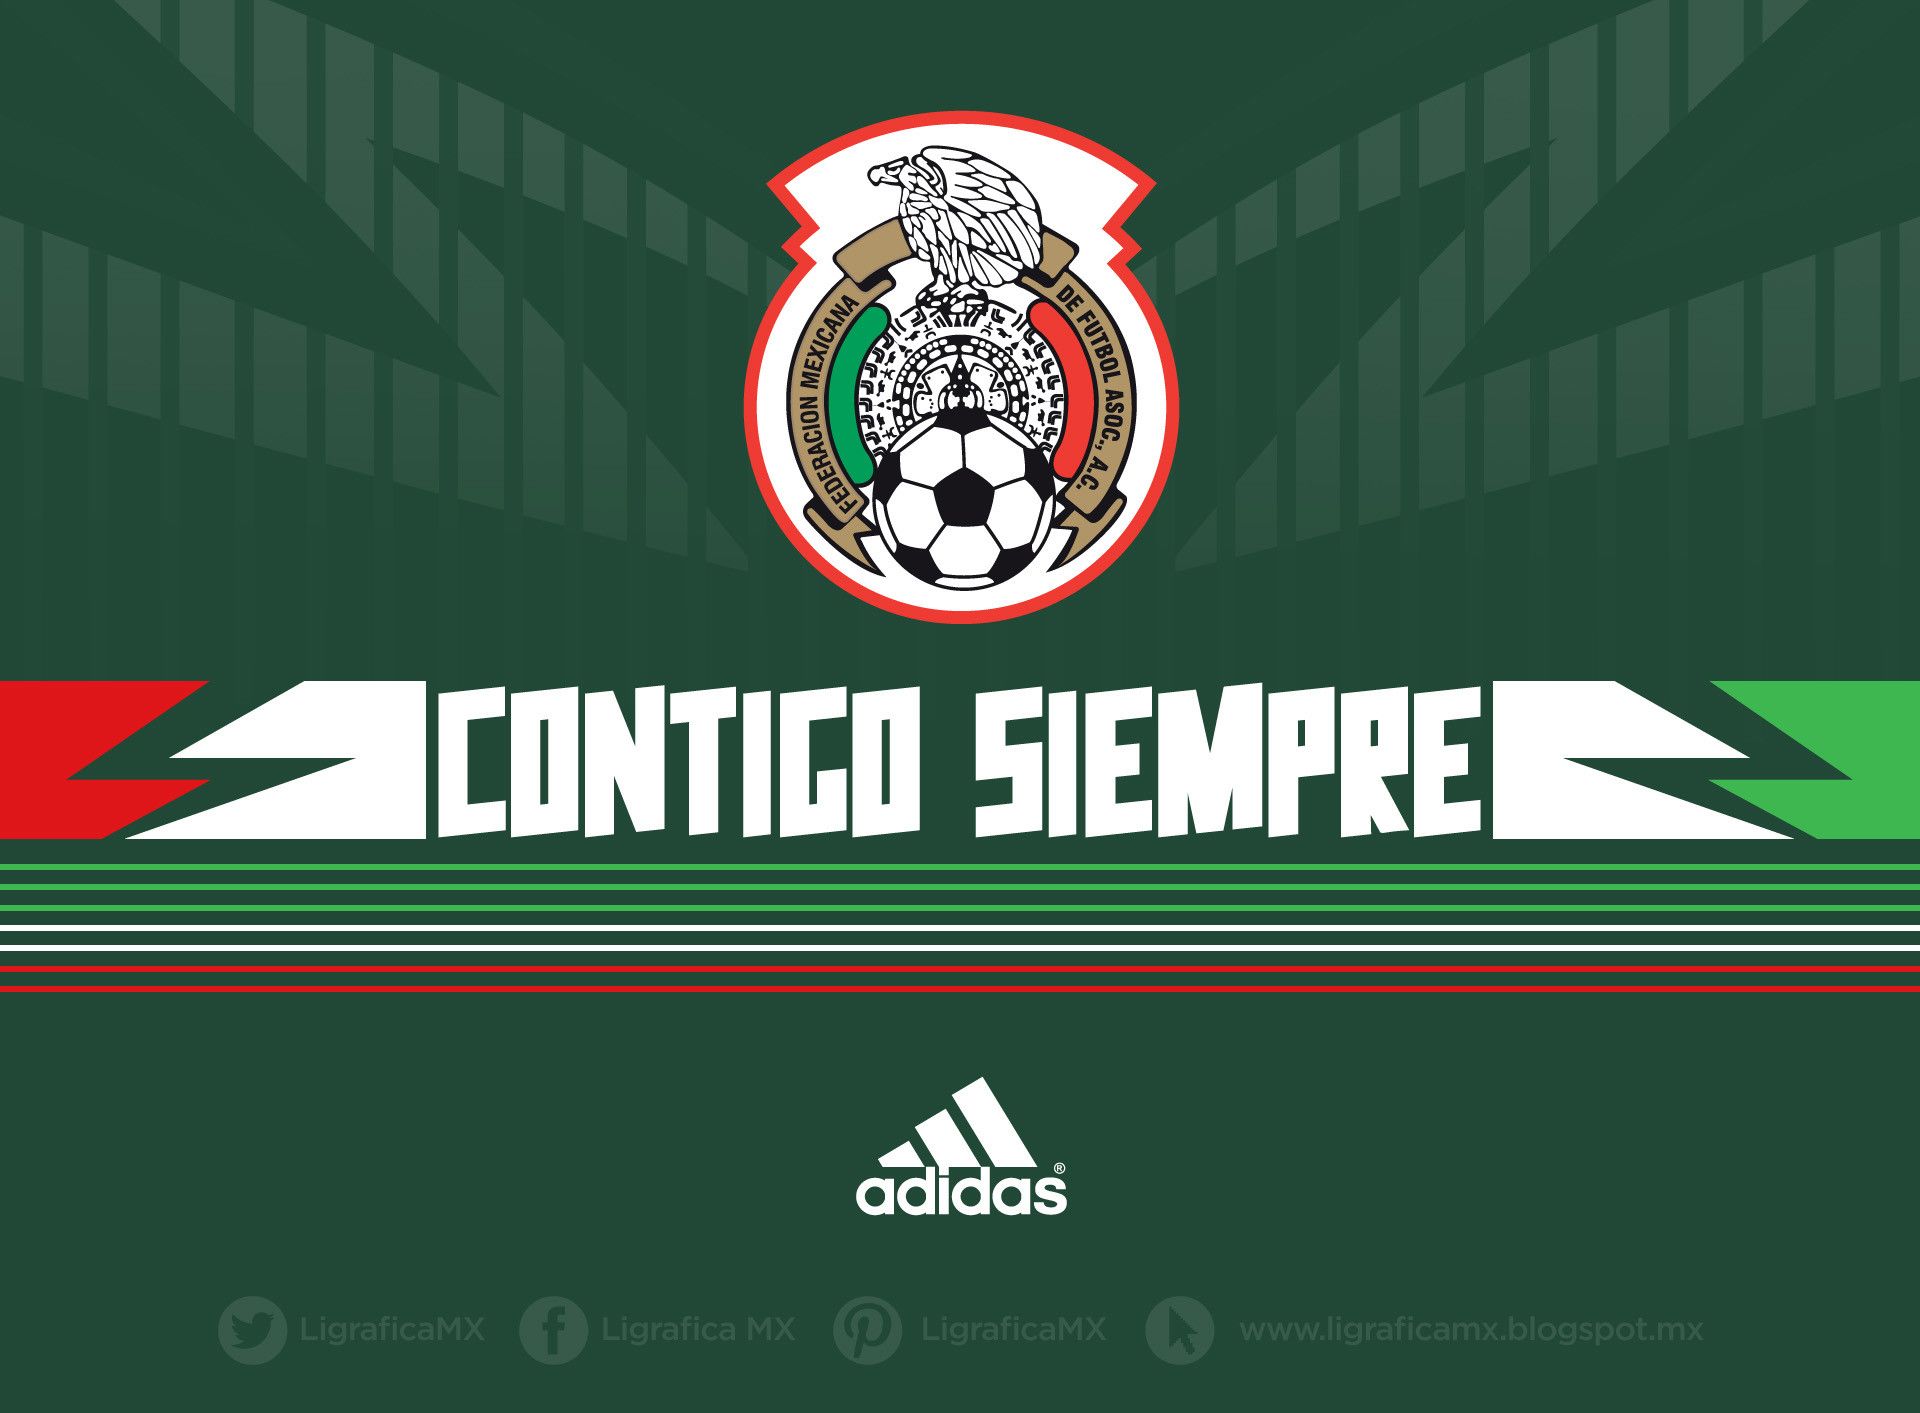 Mexico National Team Wallpaper Football Wallpapers and Videos